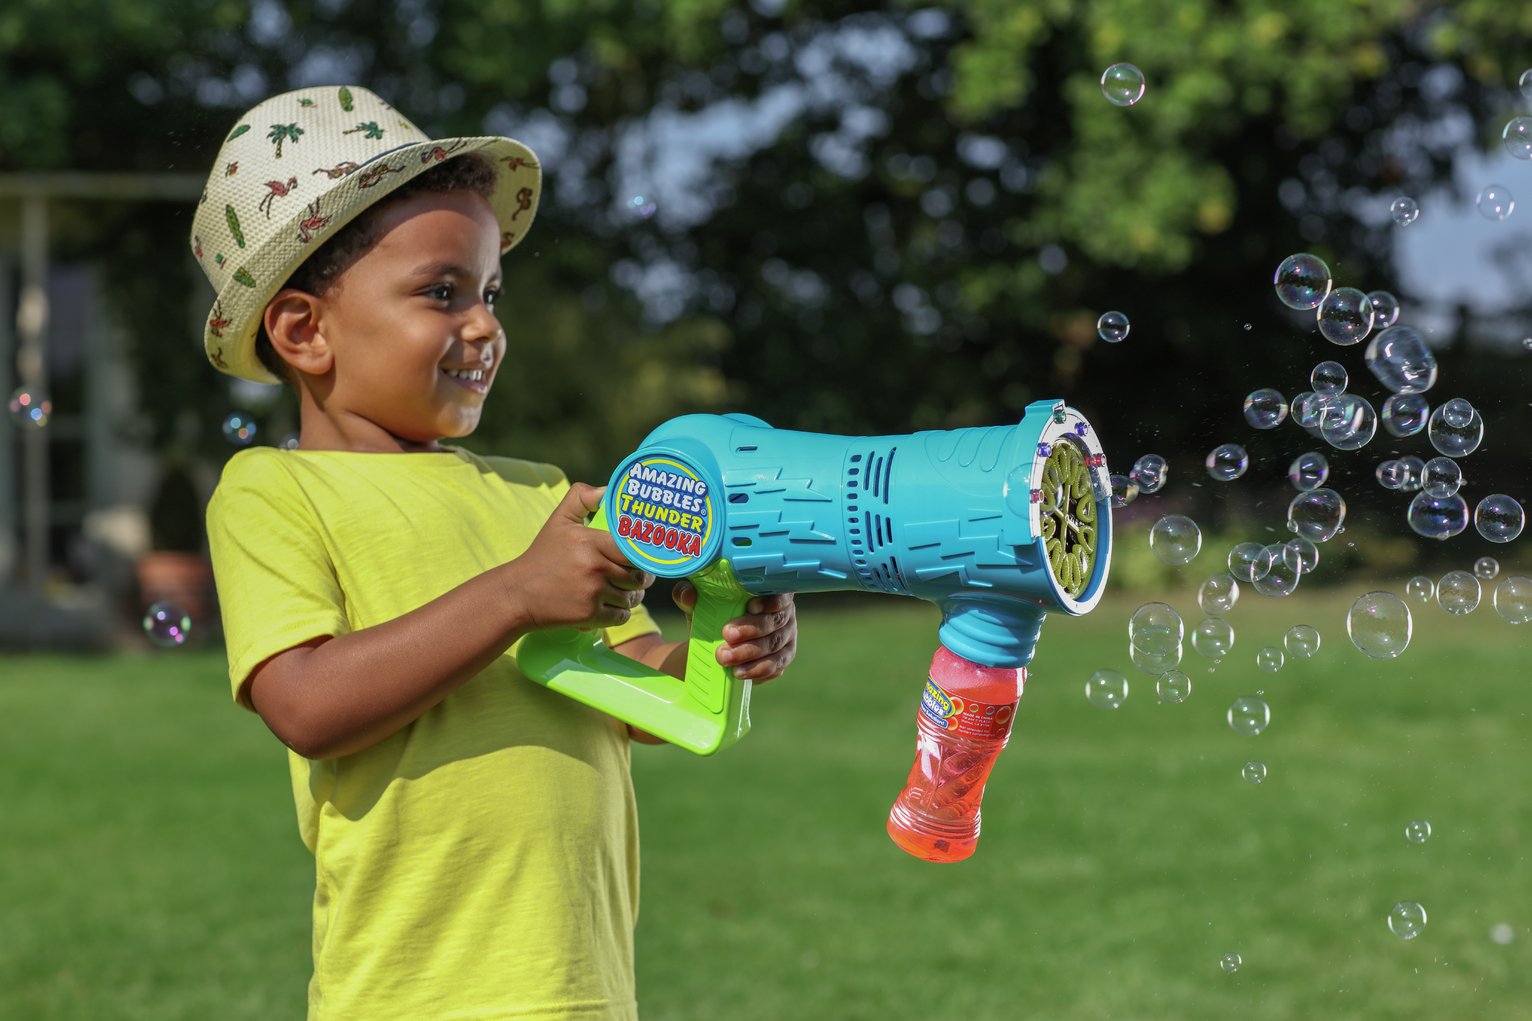 Chad Valley Mega Bubble Blaster Review